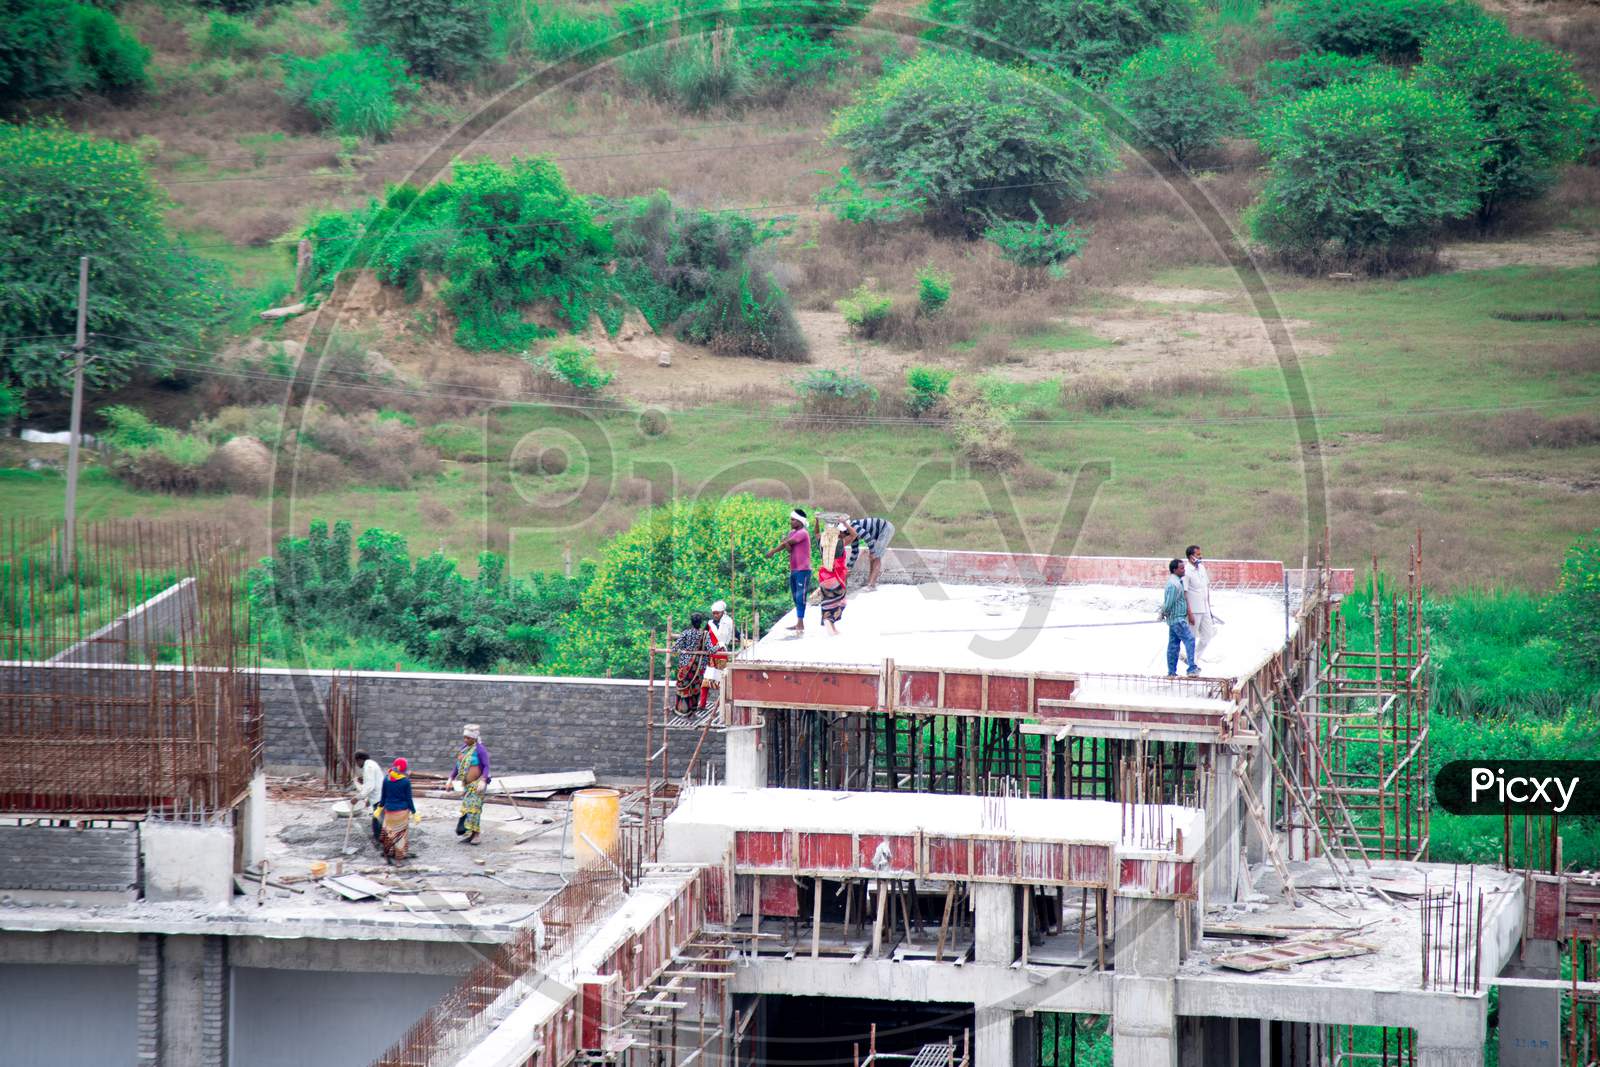 Construction Of Roof Of Building By Mixing Concrete At The Base And Using A Human Chain To Carry It To The Roof Where A Poor Poverty Stricken Labourer Pours It